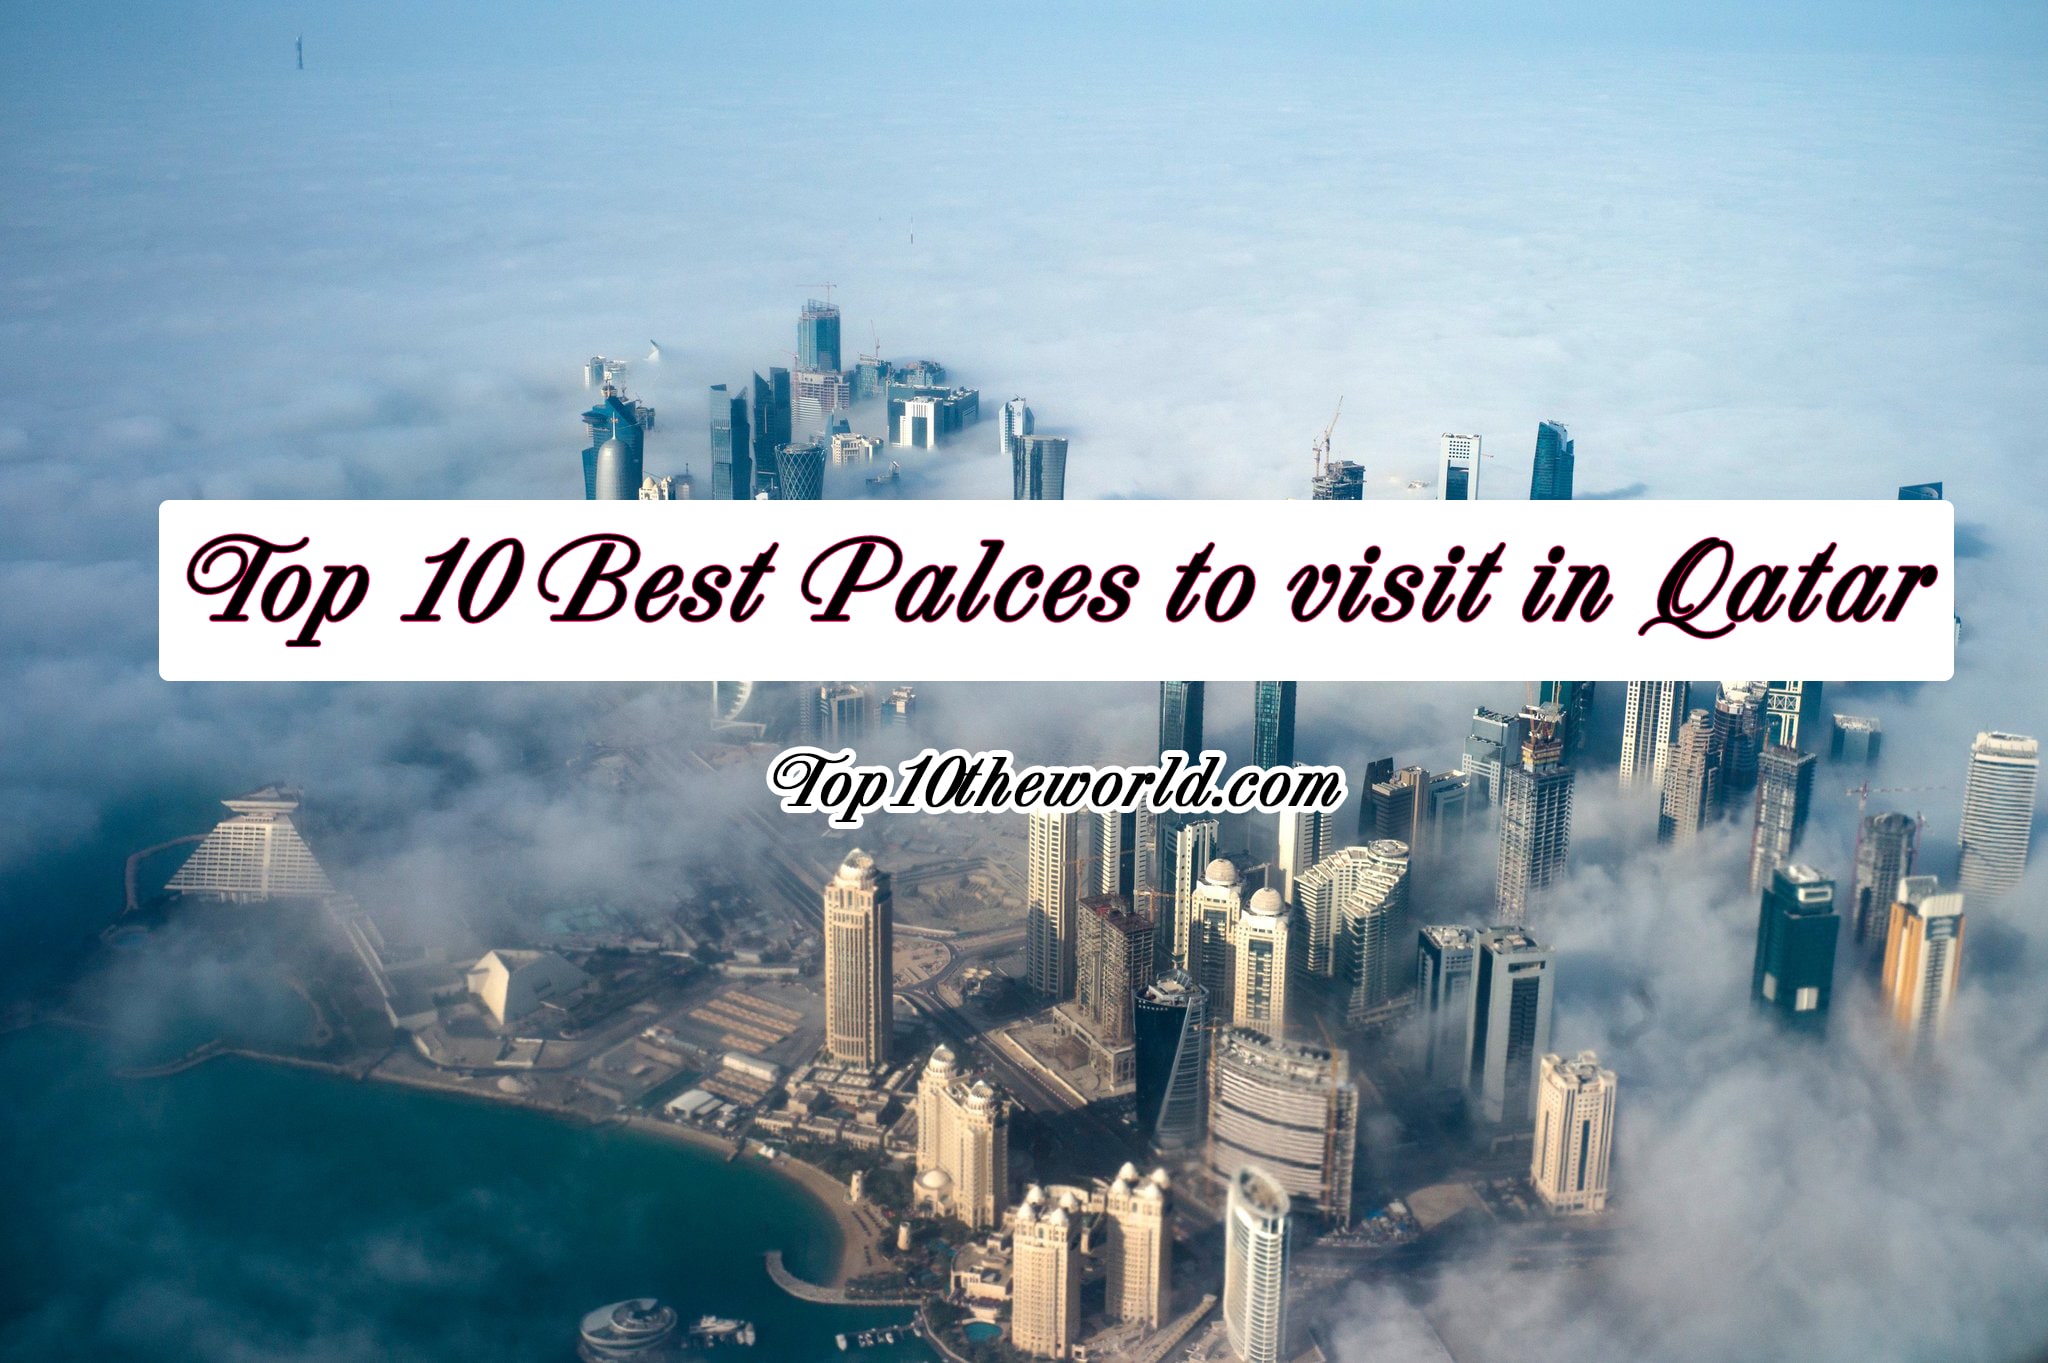 Top 10 Best Palces to visit in Qatar